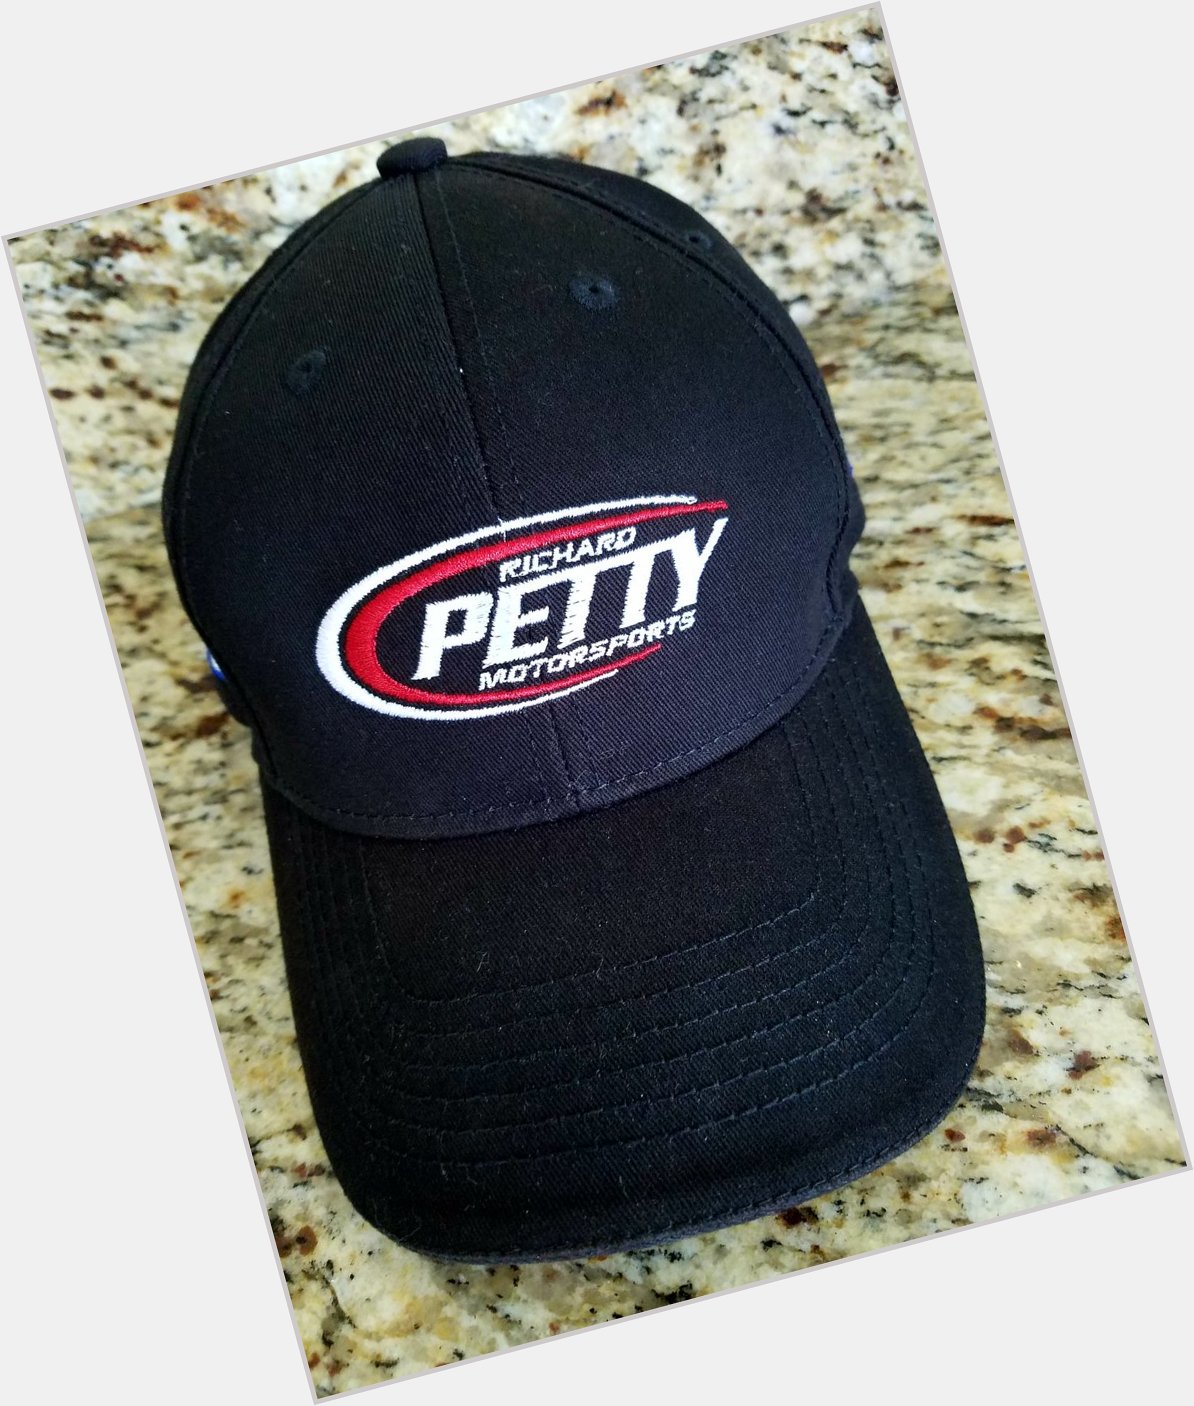 Hat choice for the day in recognition of 80th birthday. Happy Birthday Richard Petty! 